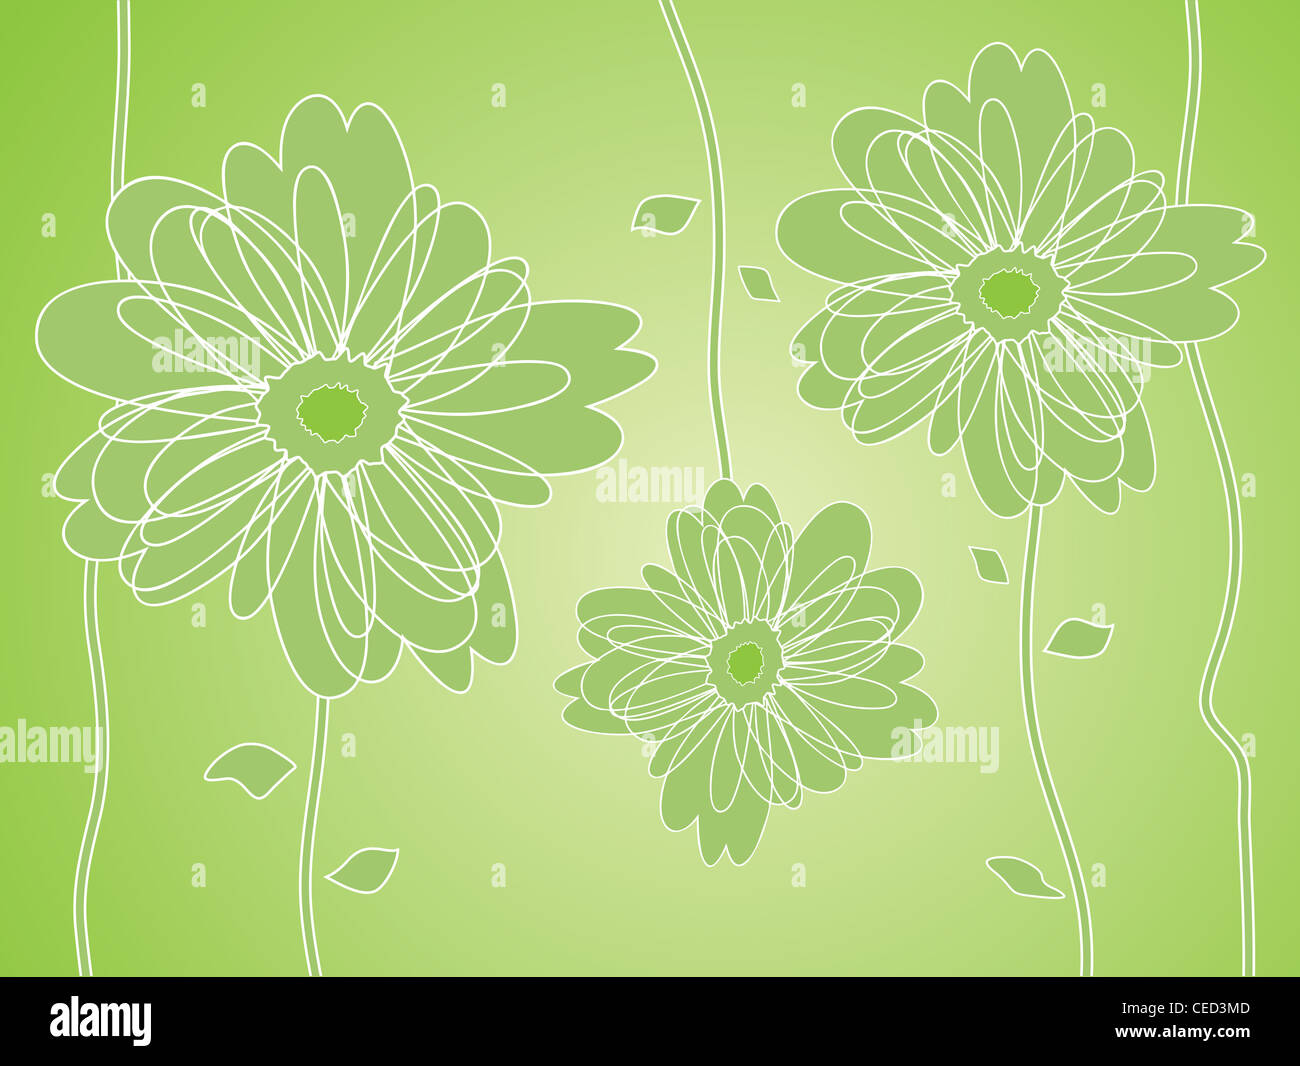 Green Flower silhouettes background illustration. Stock Photo